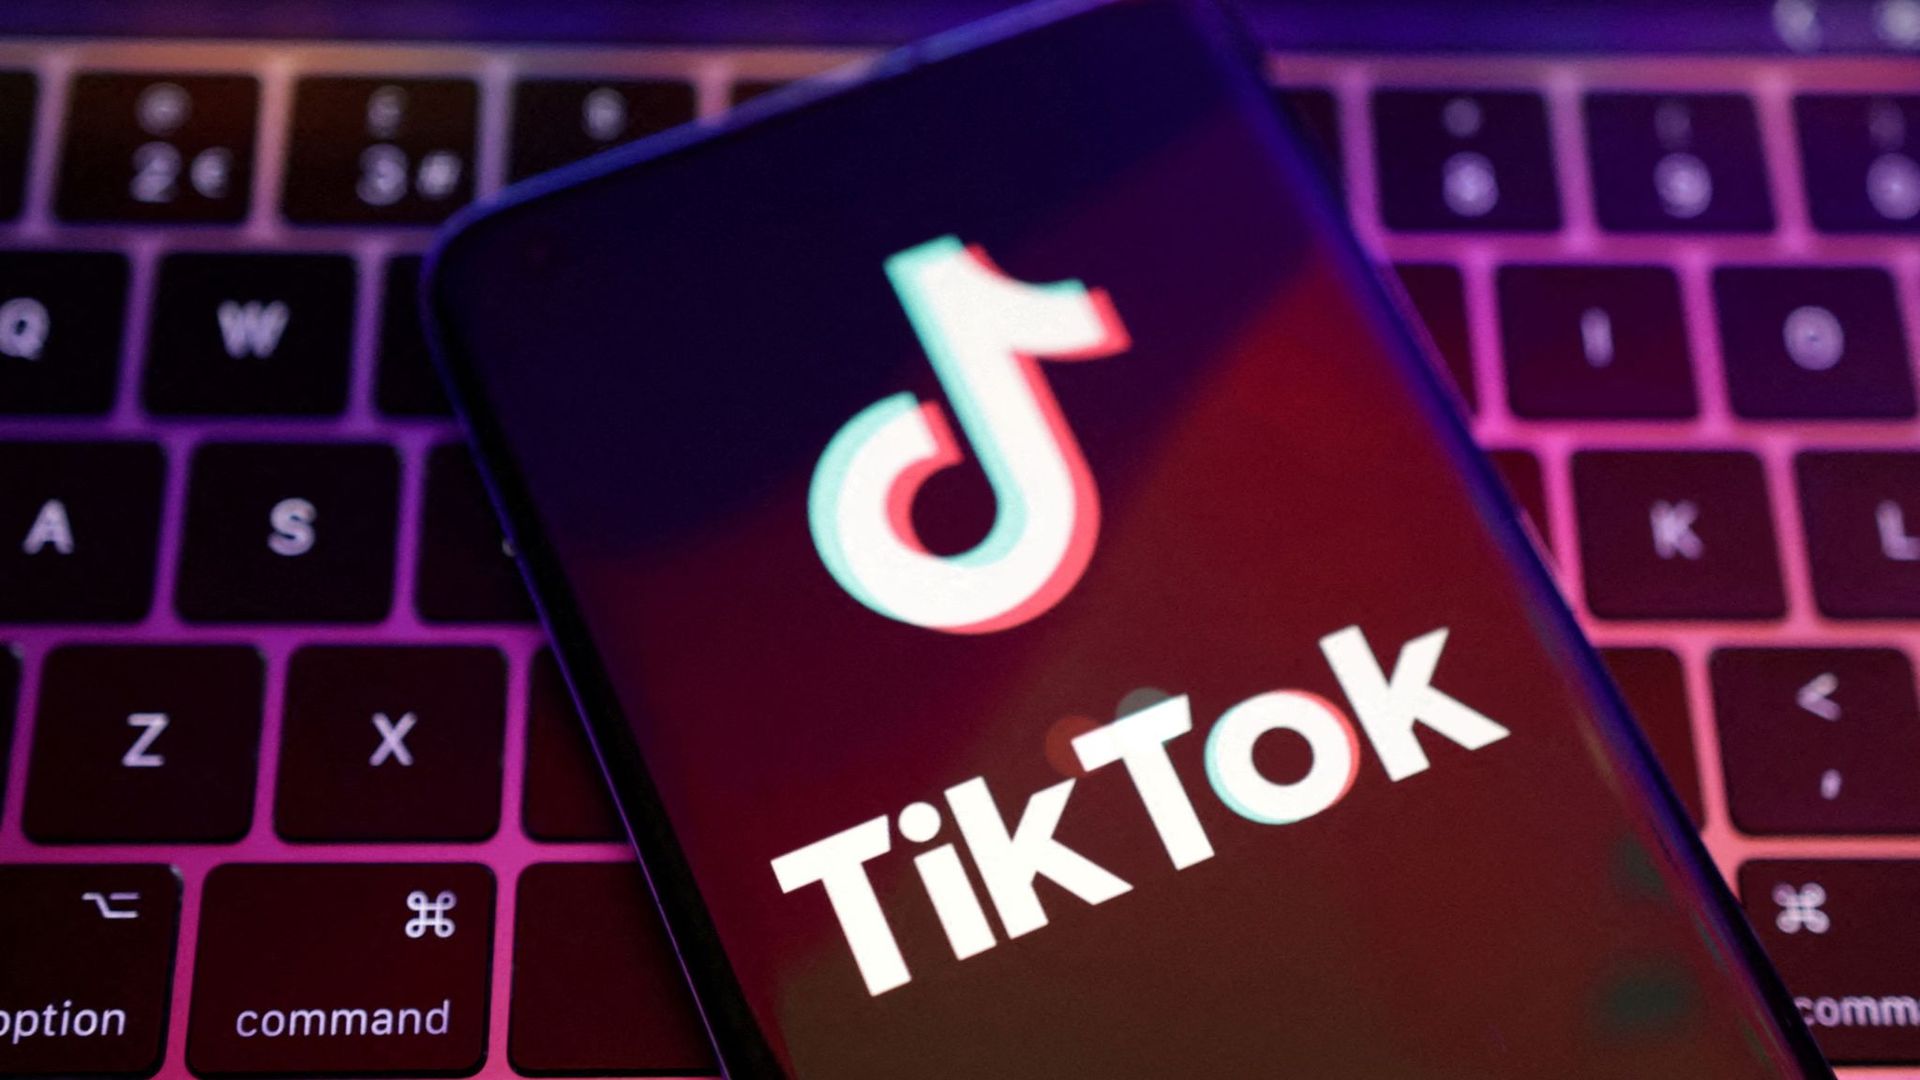 Today, we are going to be covering how to use TikTok Photo Mode, which is being added to the popular social media app as part of the enhanced editing tools update.